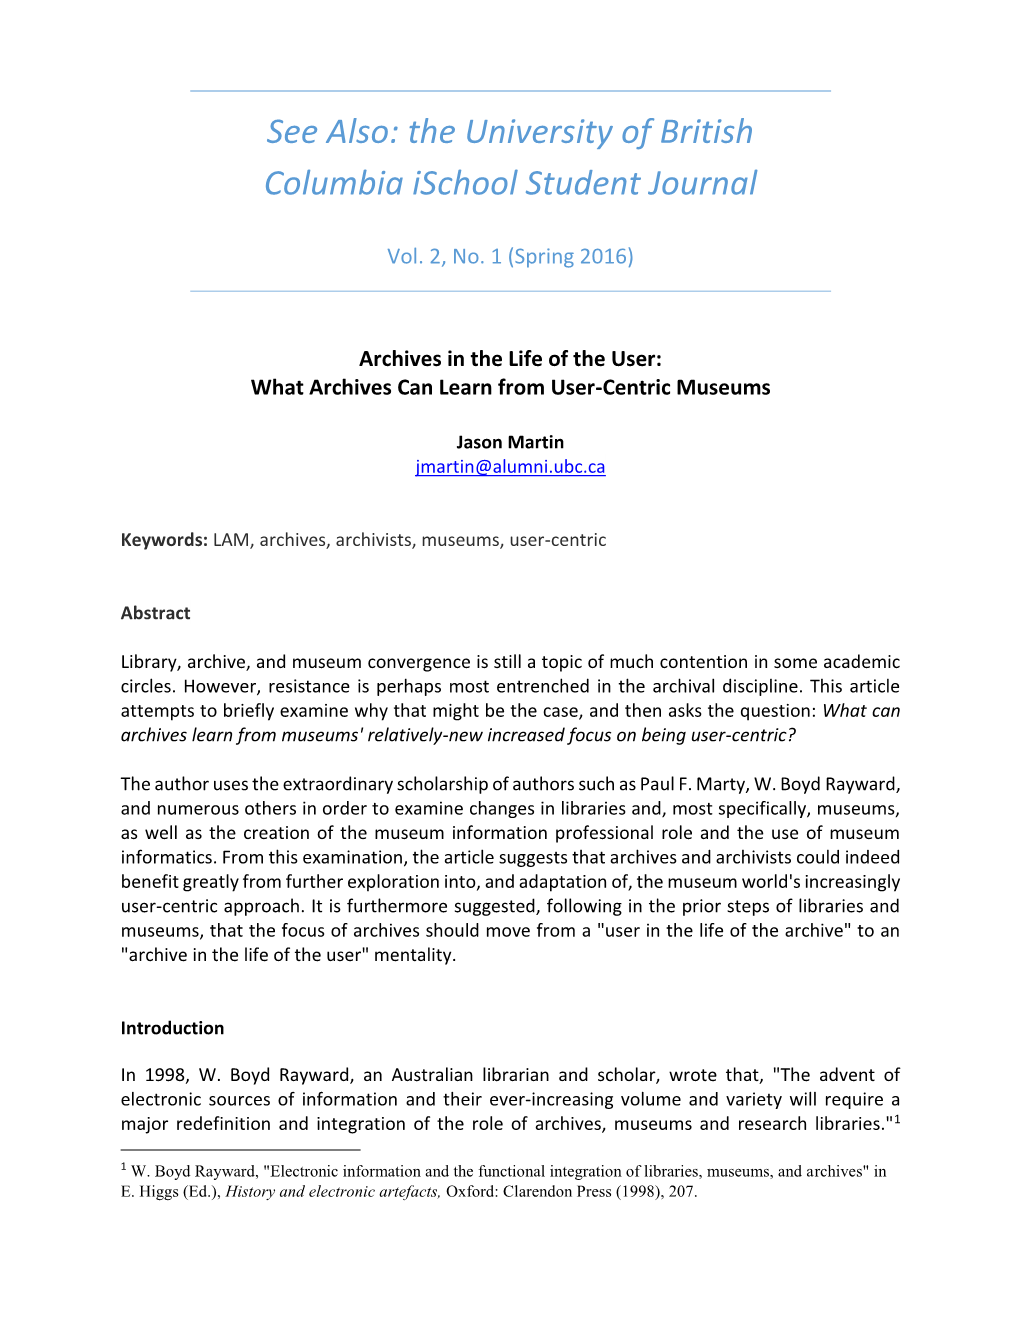 See Also: the University of British Columbia Ischool Student Journal